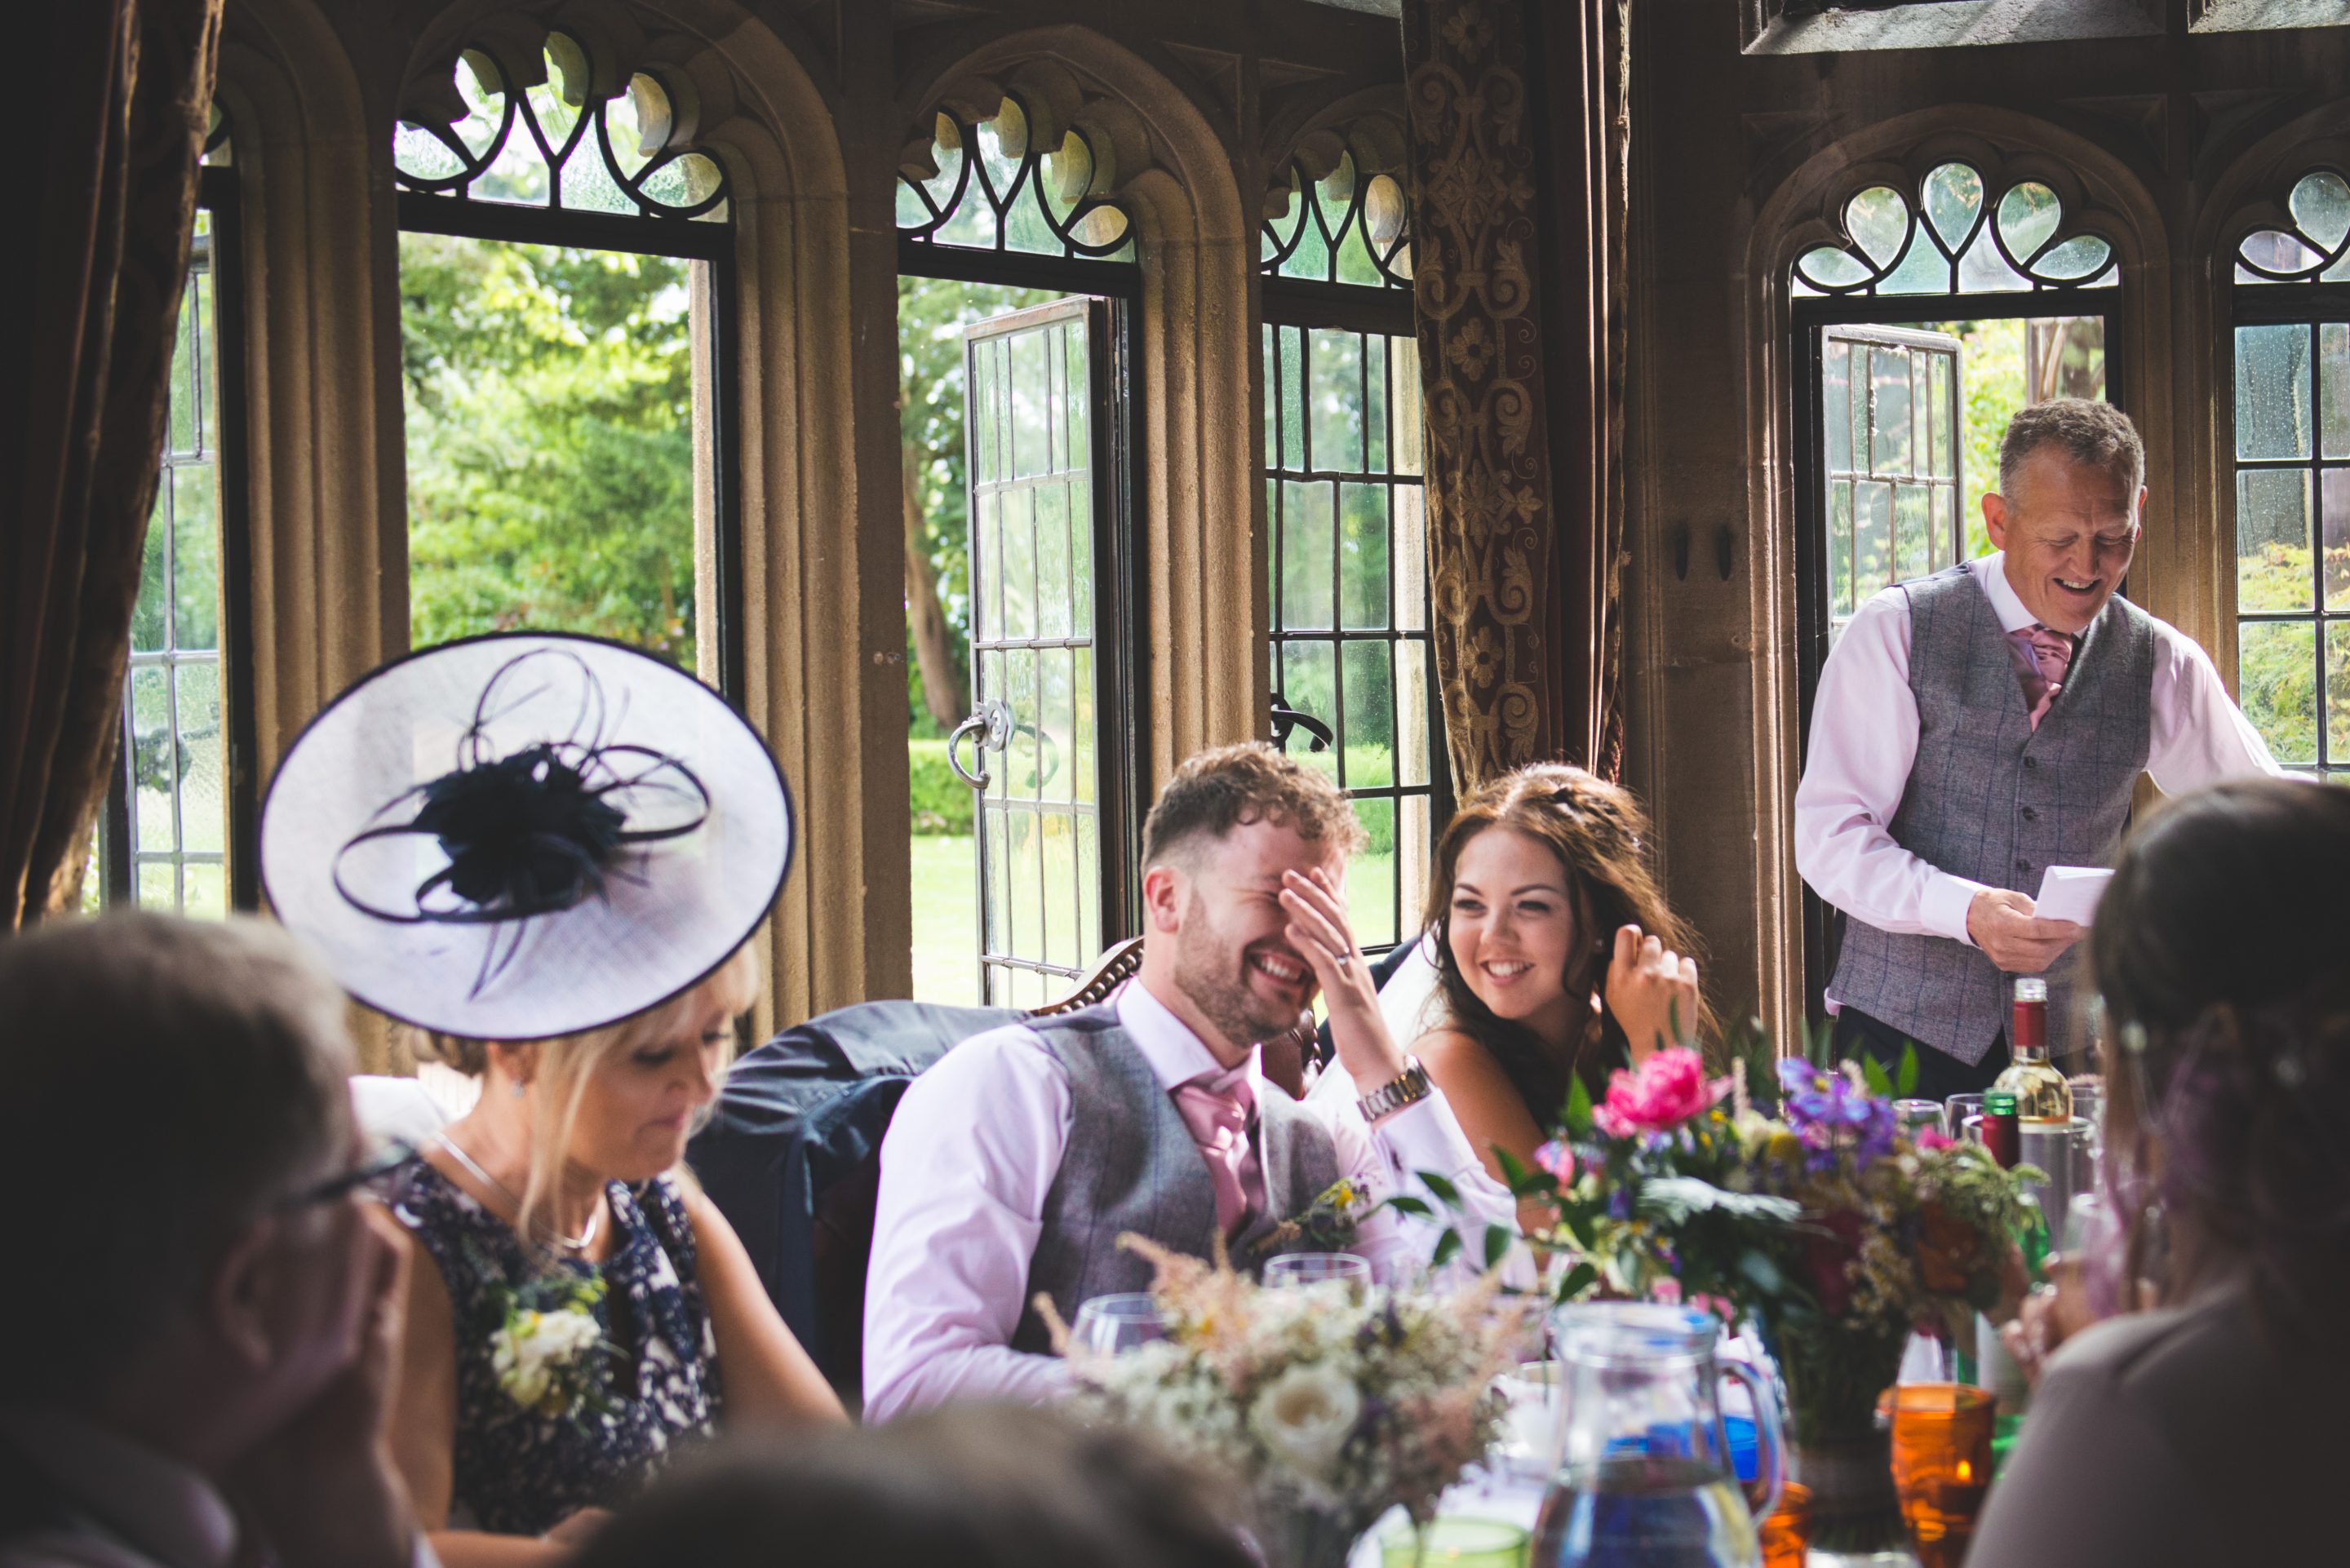 The Speeches, when the bride's dad embarrasses the groom,